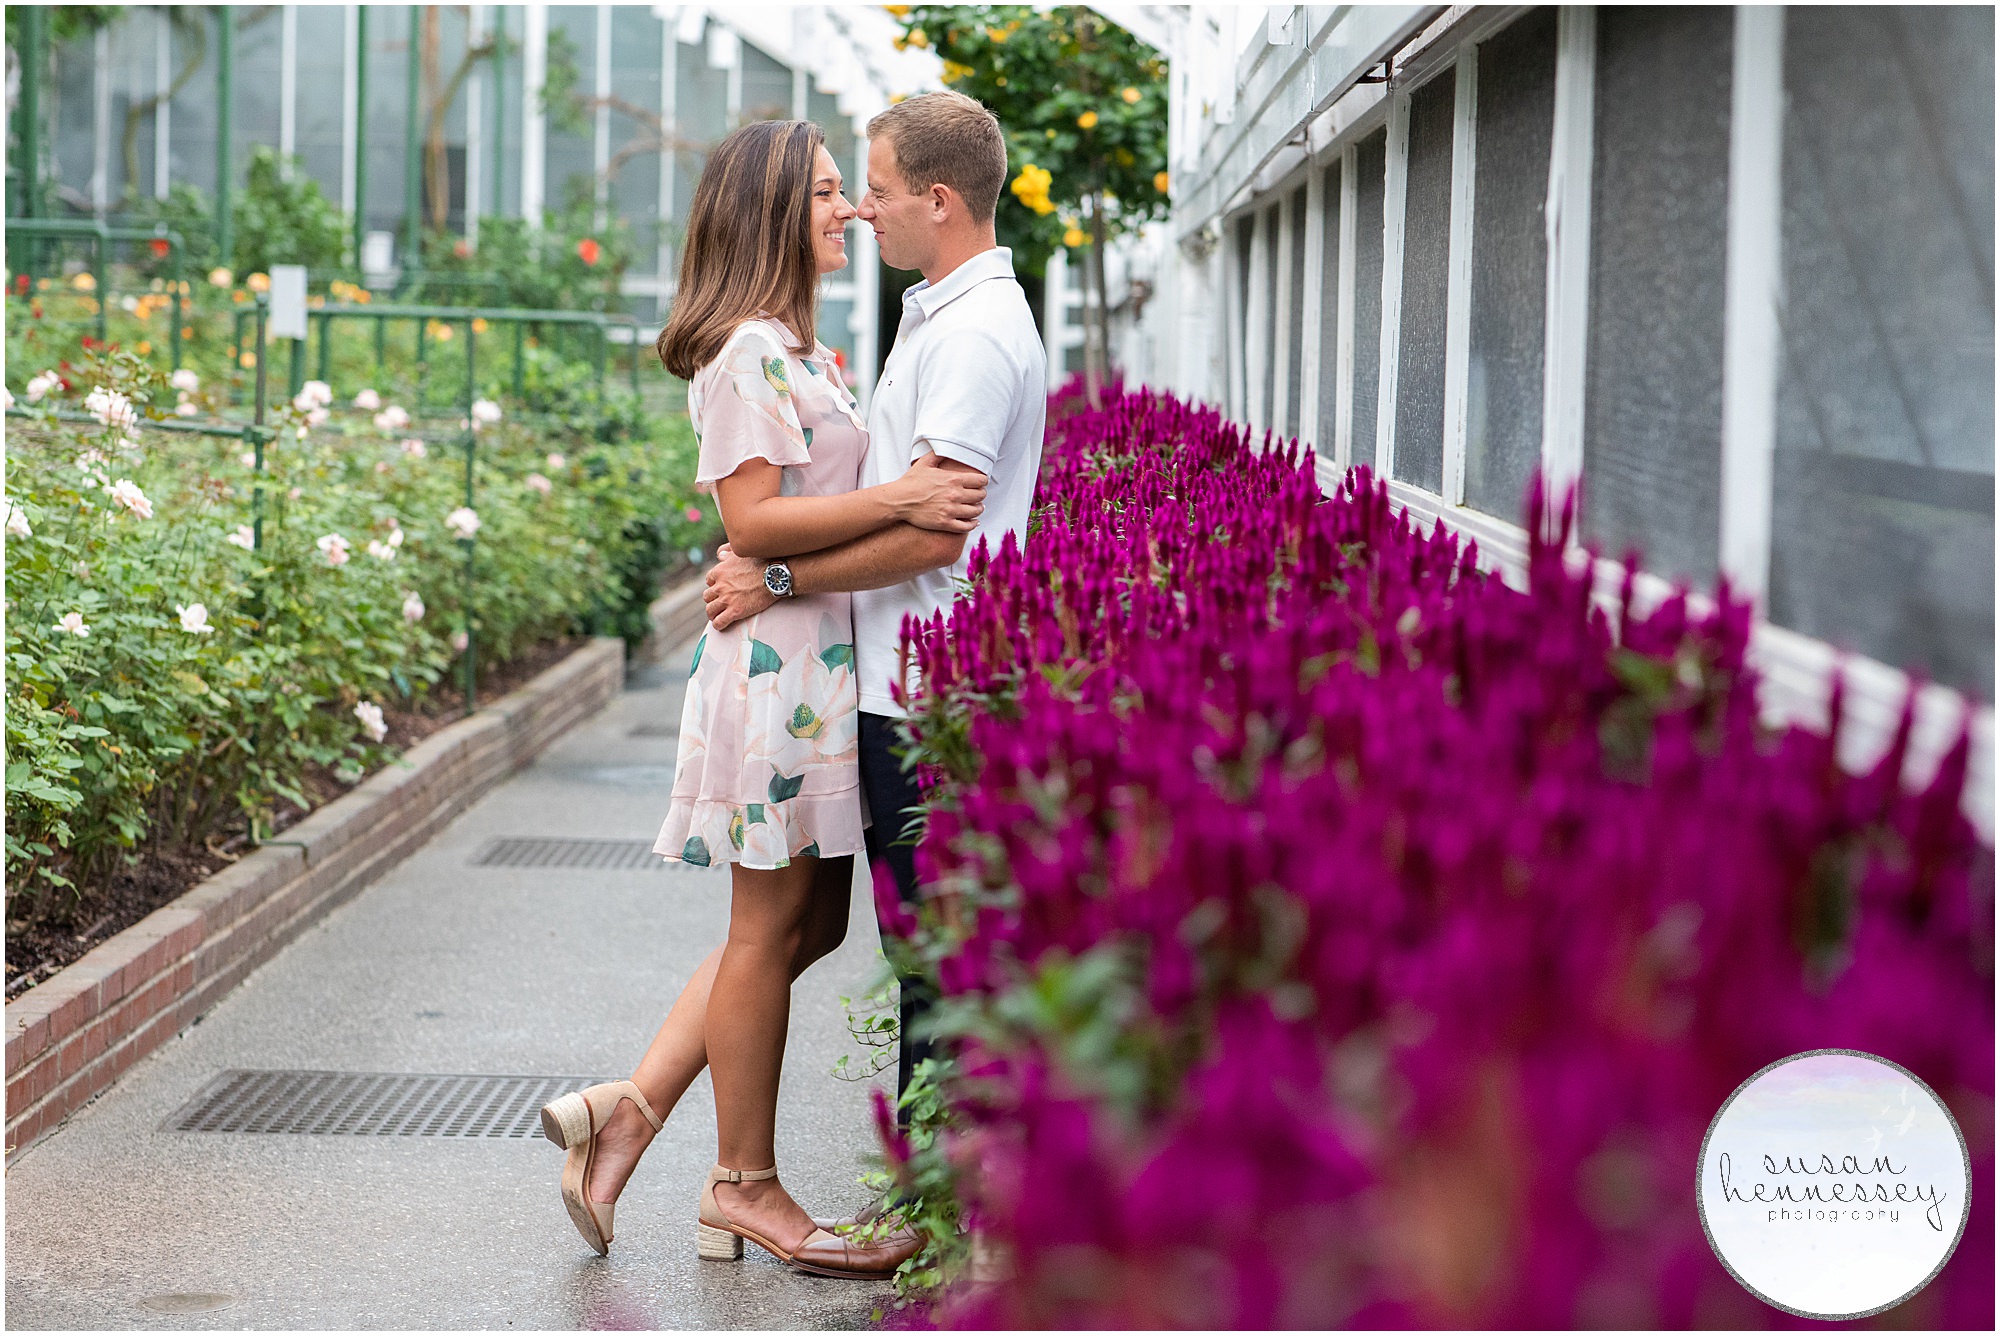 Engagement photography at Longwood Gardens